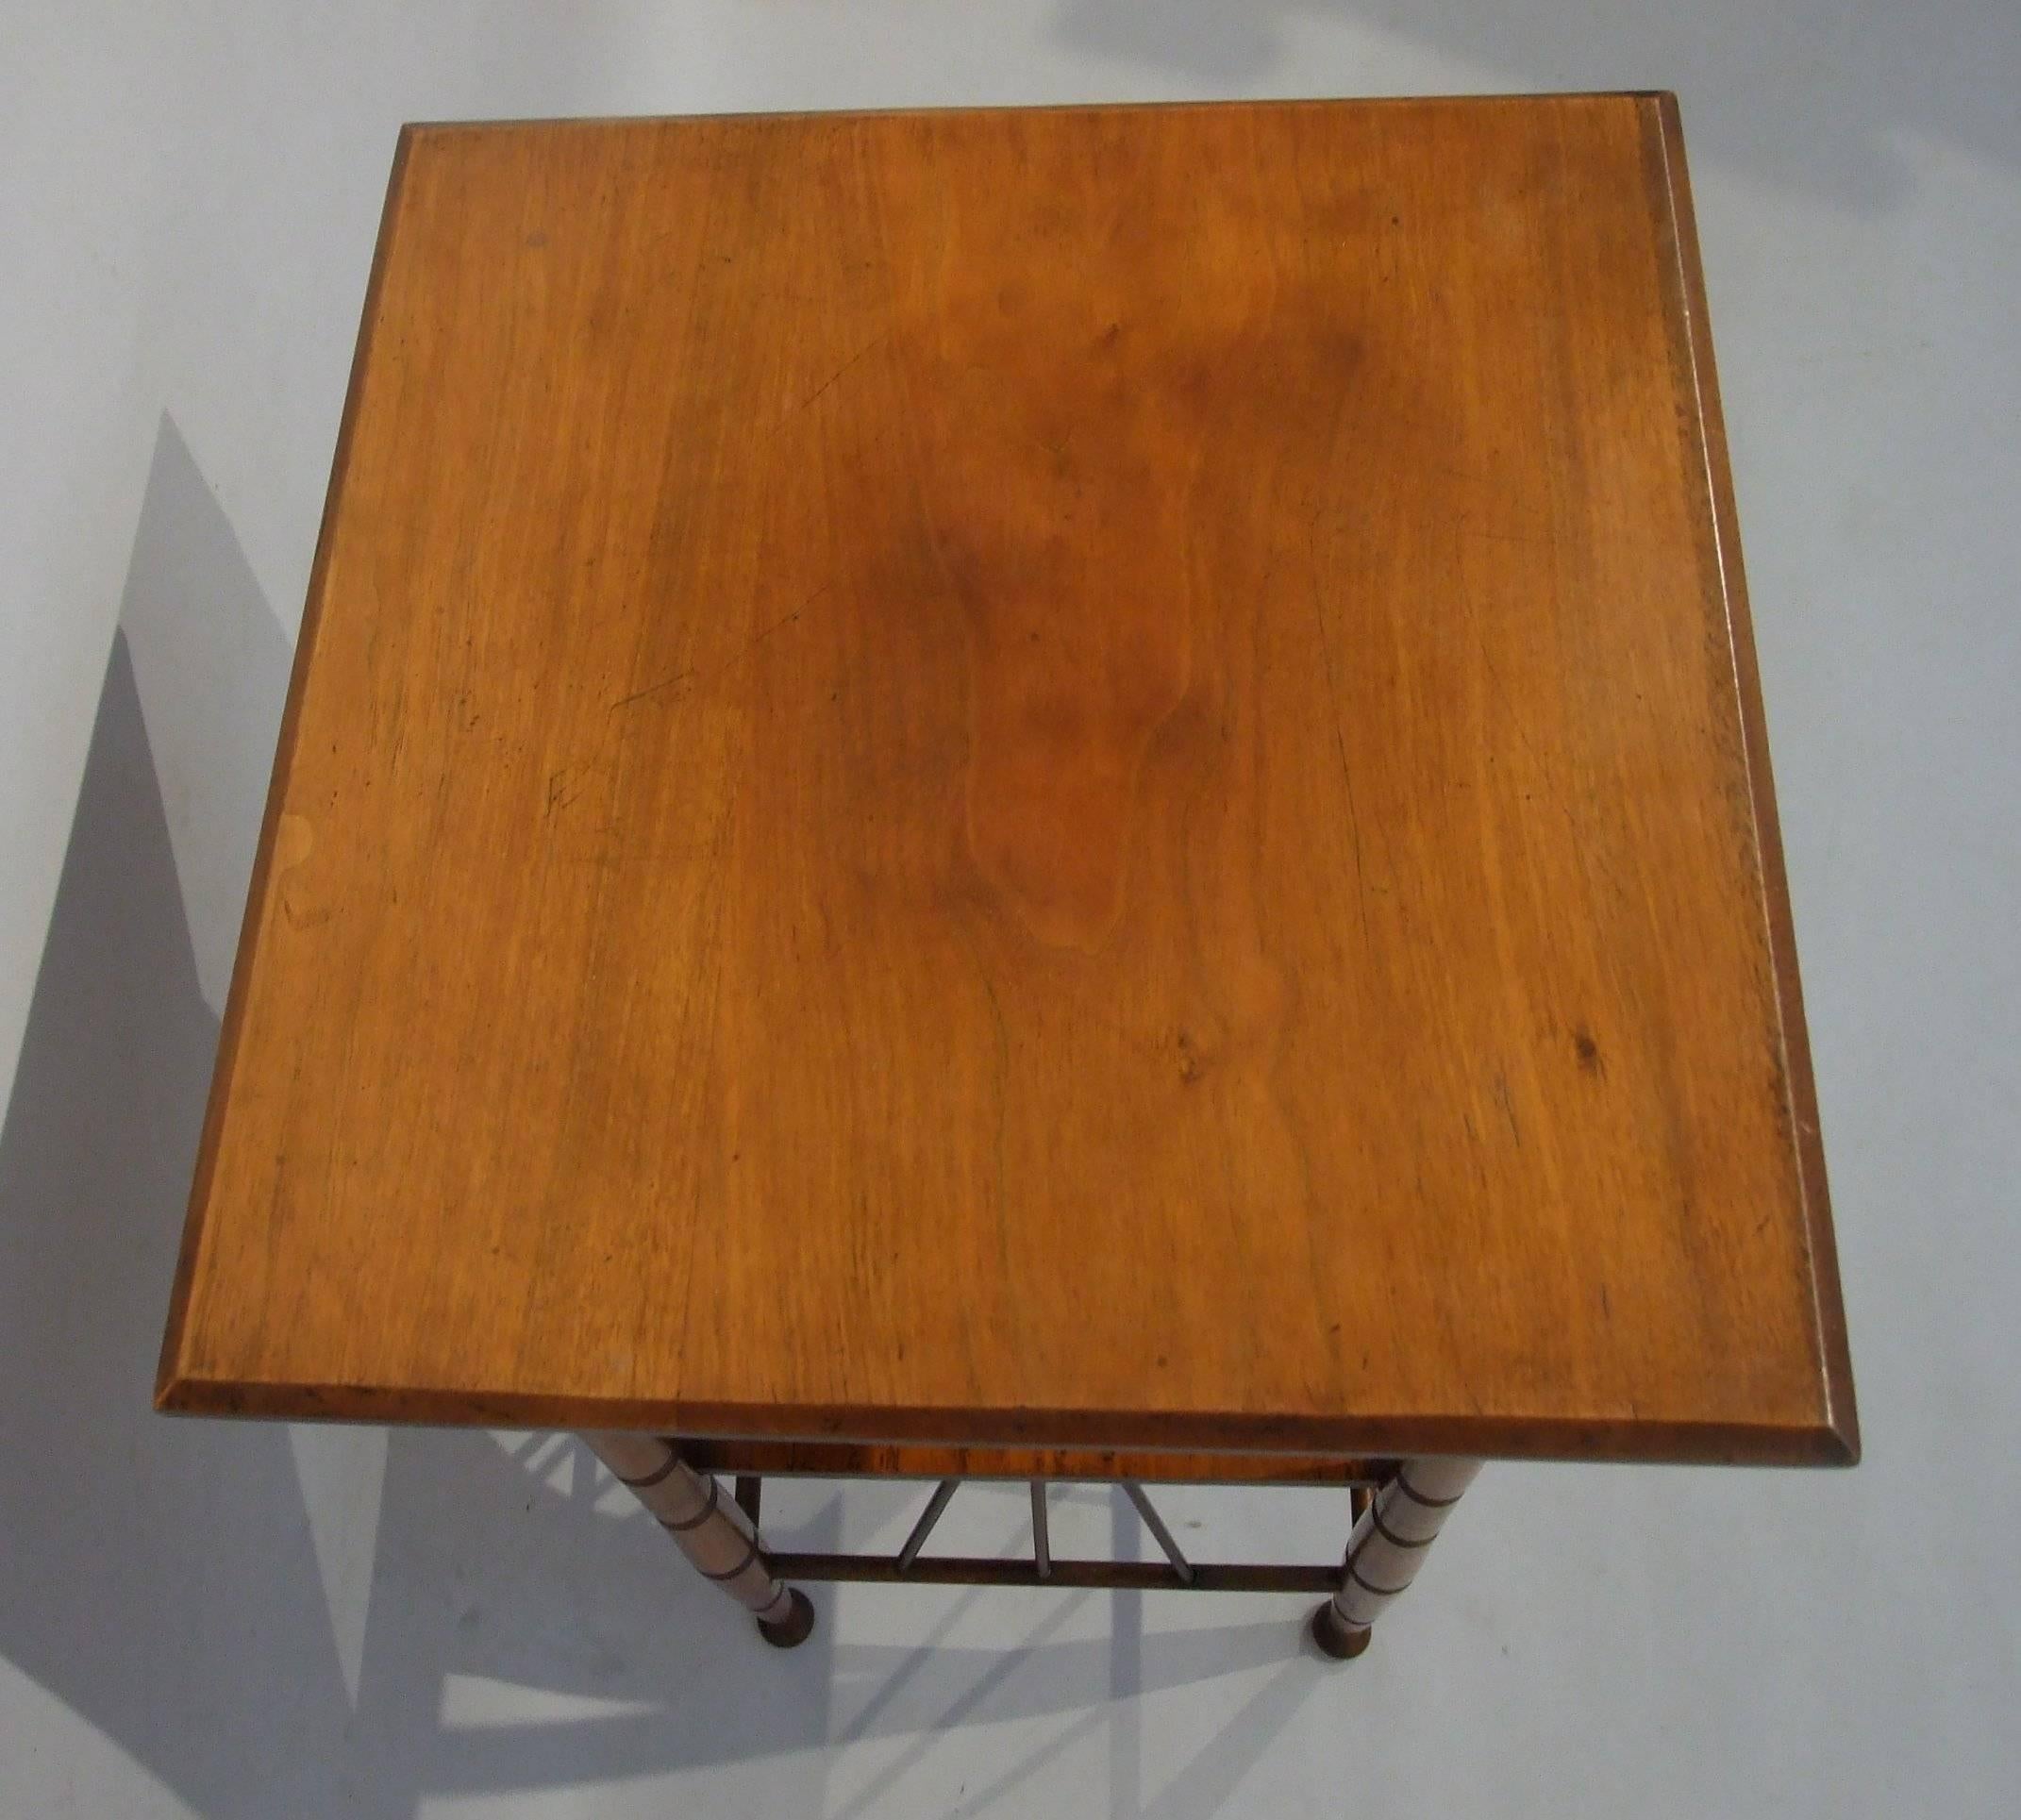 Aesthetic Movement Godwin Style Walnut Coffee Table For Sale